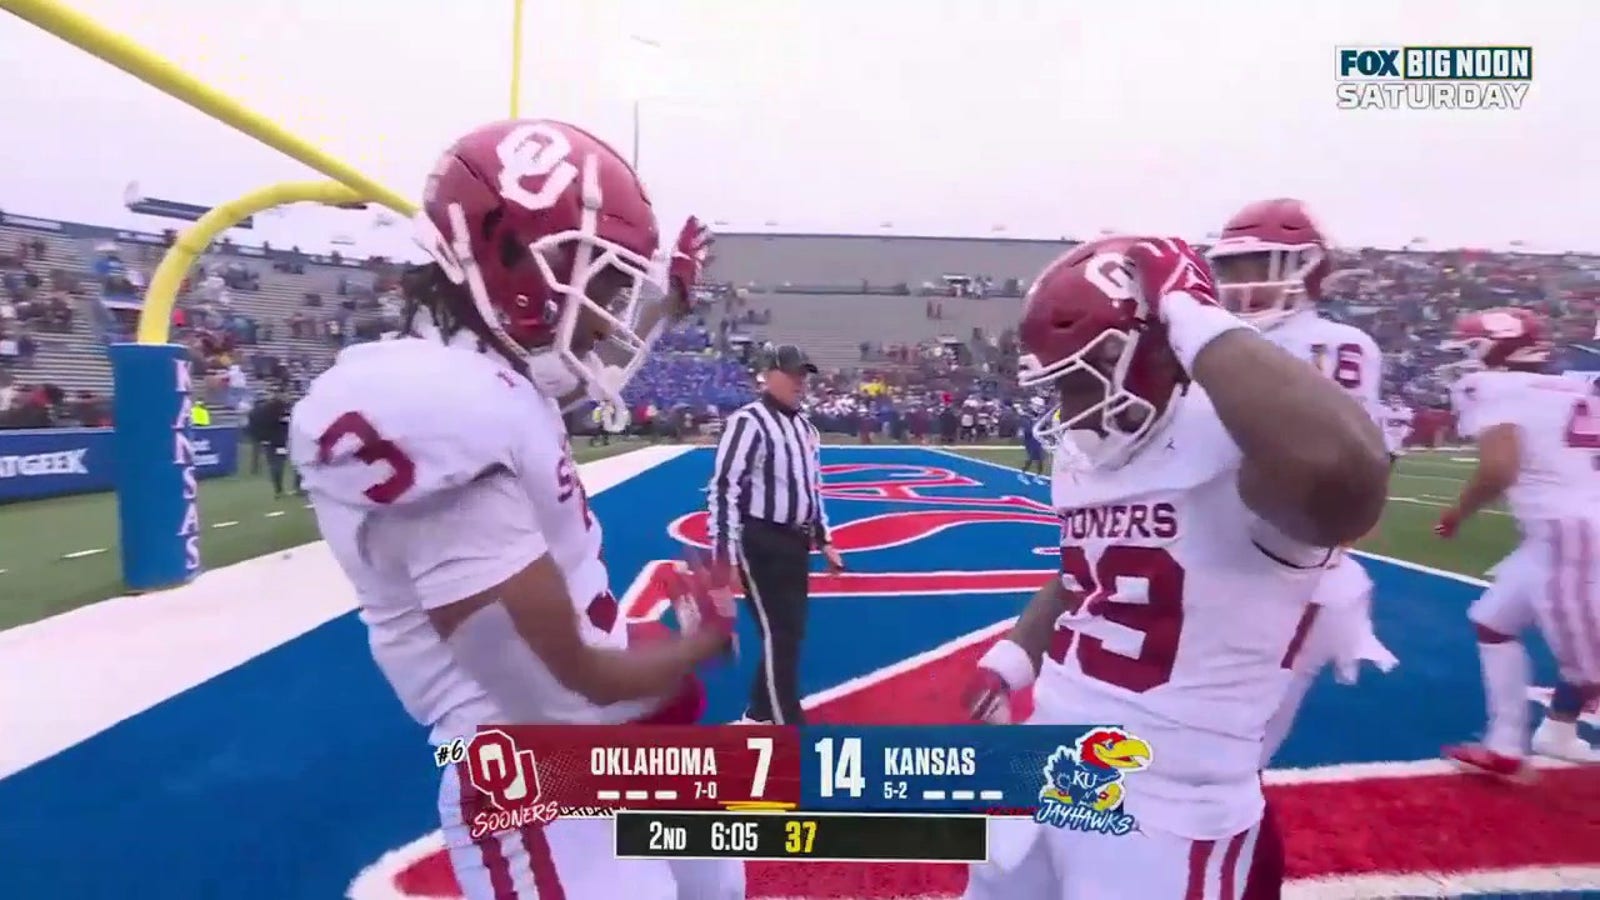 Oklahoma's Tawee Walker rushes for 3-yard TD to tie score